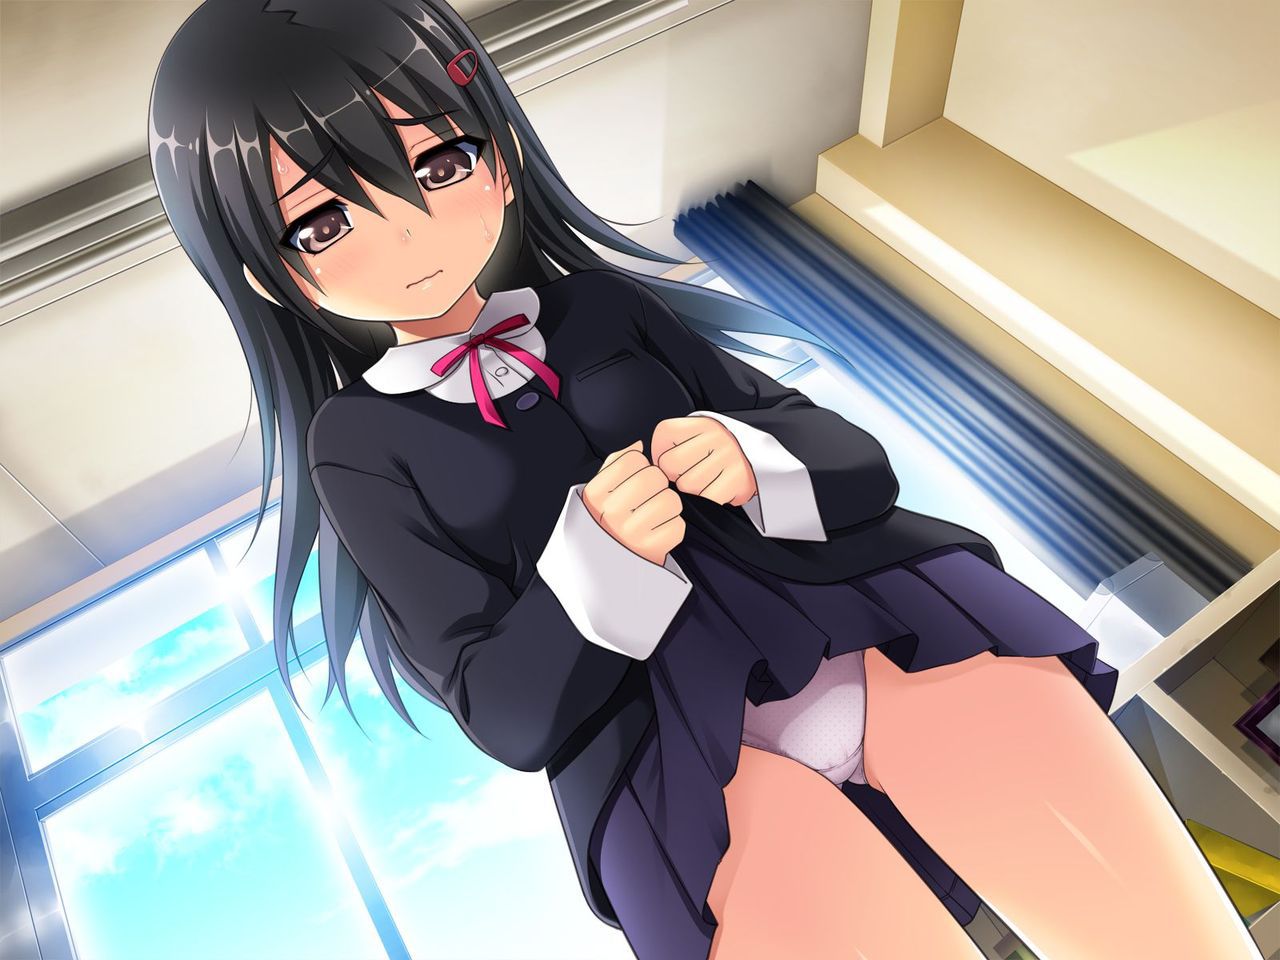 Dress up, えろあ and えろあ come exposing himself to girls too lewd 10